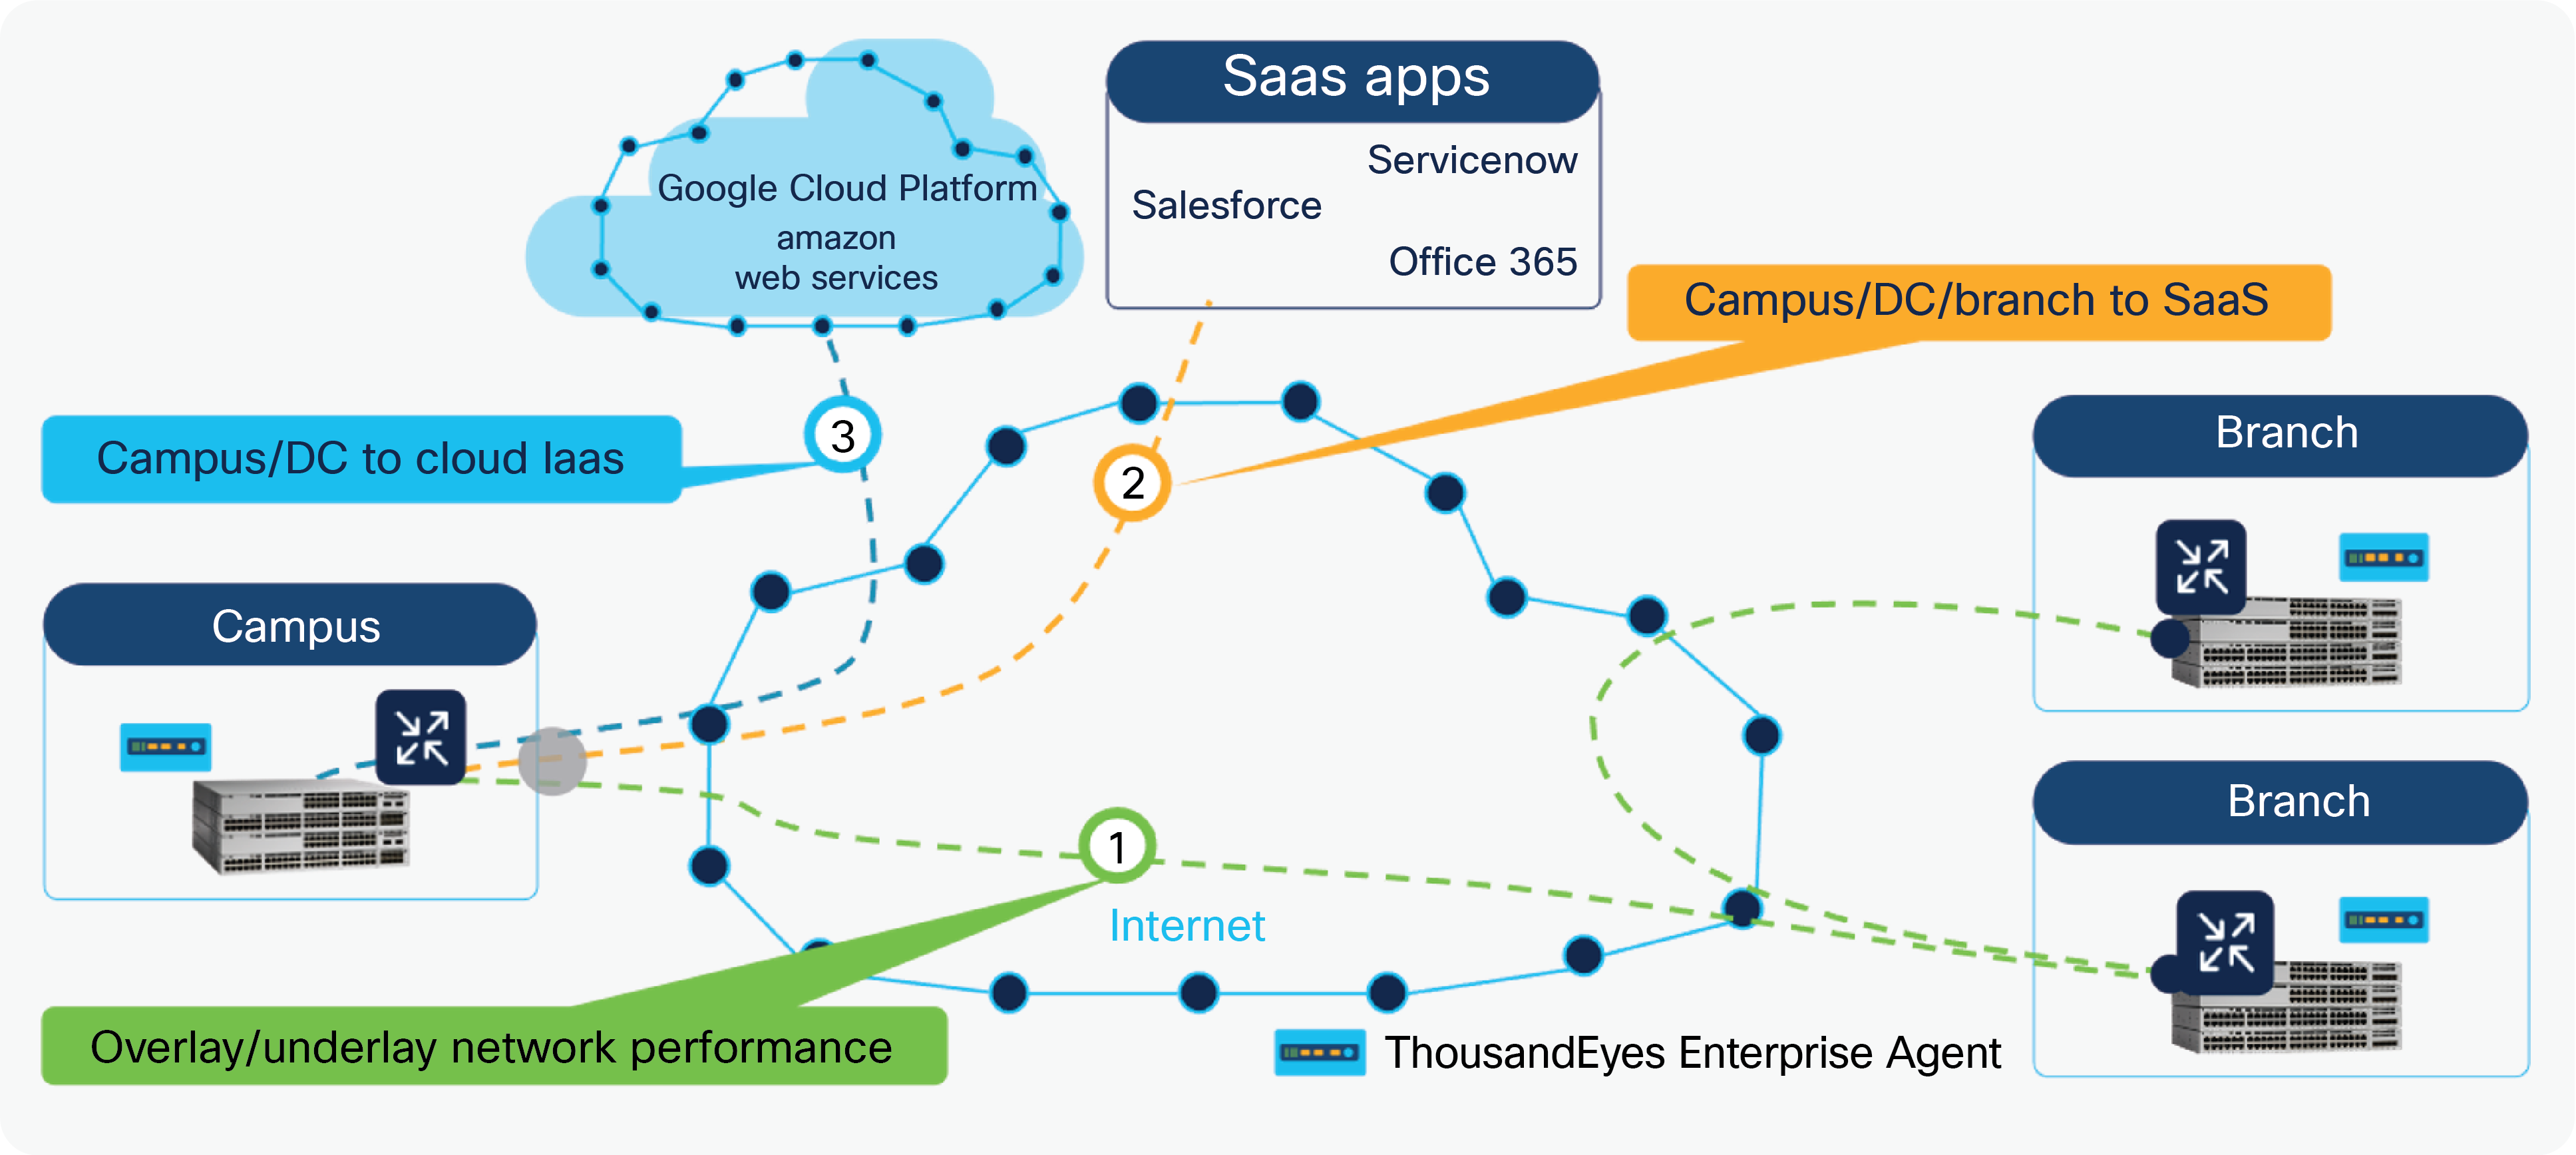 Typical ThousandEyes deployment and use cases in an enterprise campus network